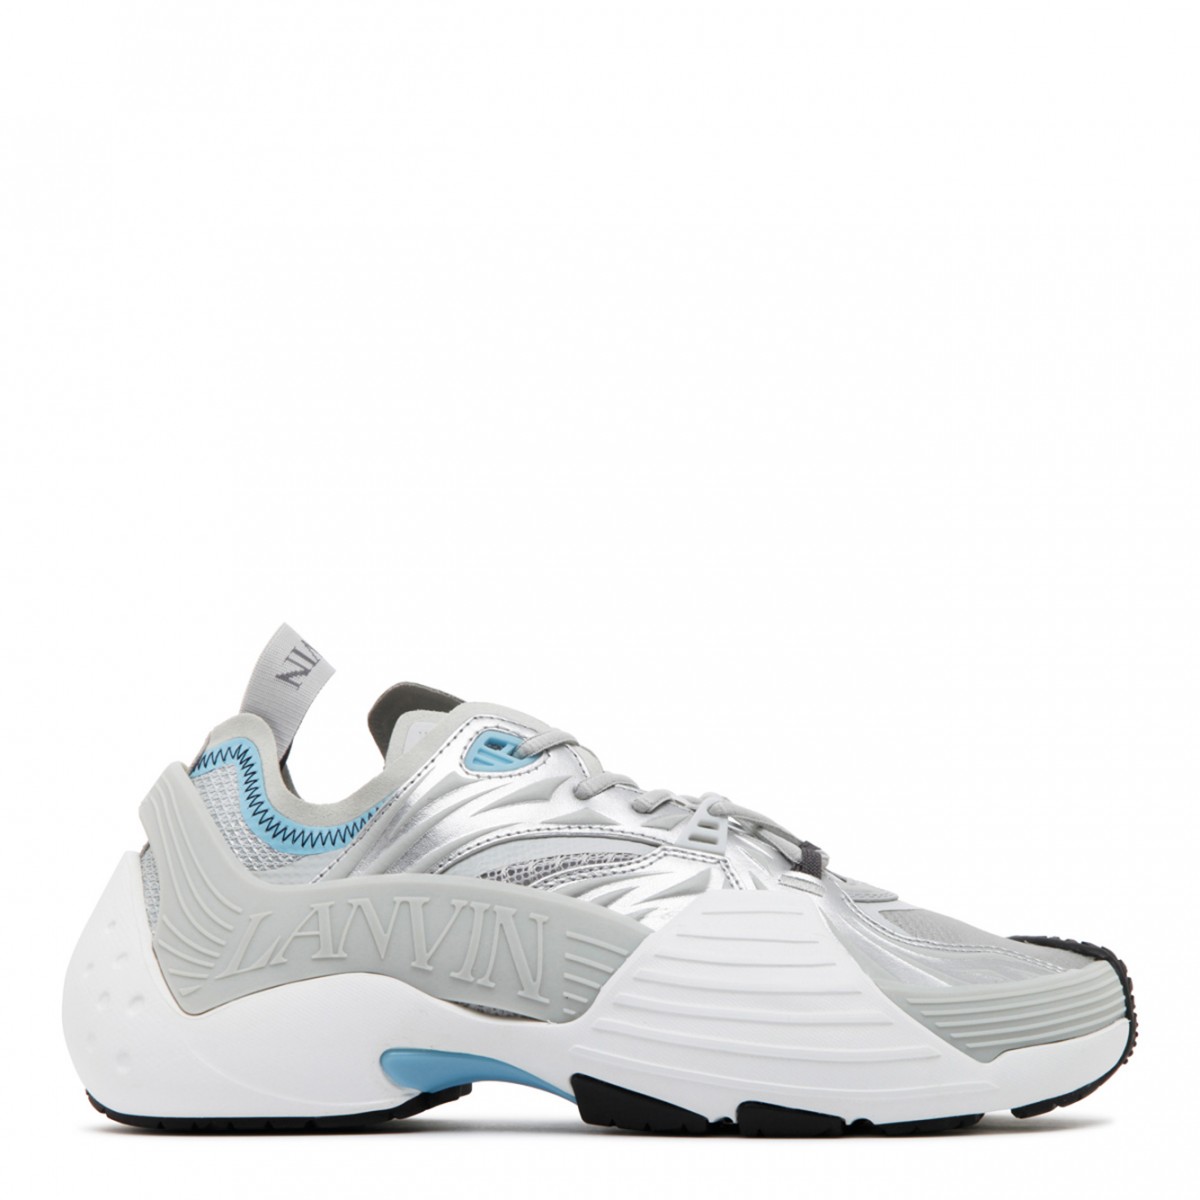 Lanvin Grey and Light Blue Calf Leather Flash X Low-Top Sneakers. 